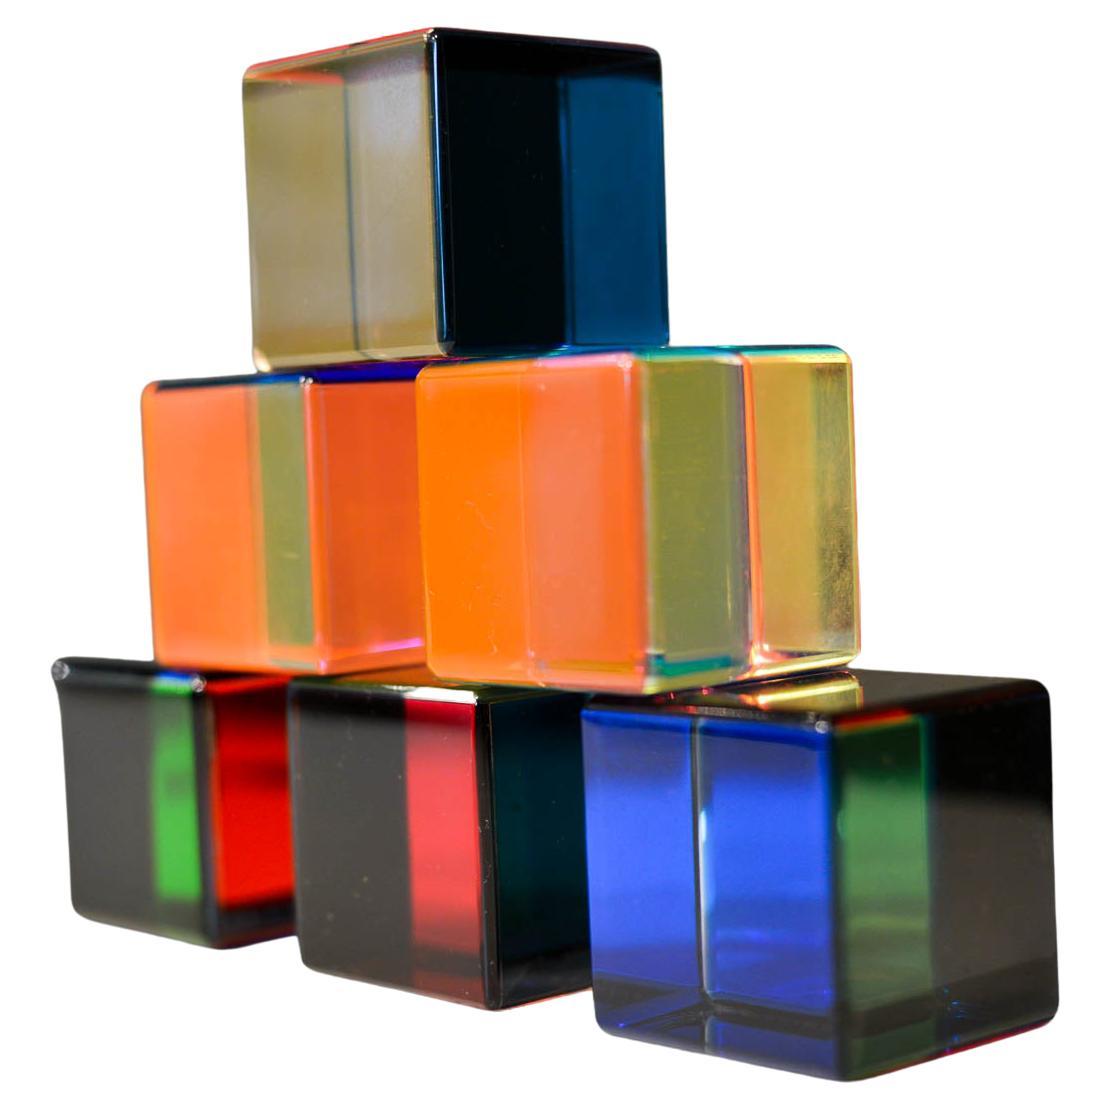 Set of 6 interchangeable colored lucite cubes by Vasa Velizar Mihich, 2011. Signed and dated in very good condition with only slight wear to each cube. Measures each 2.25